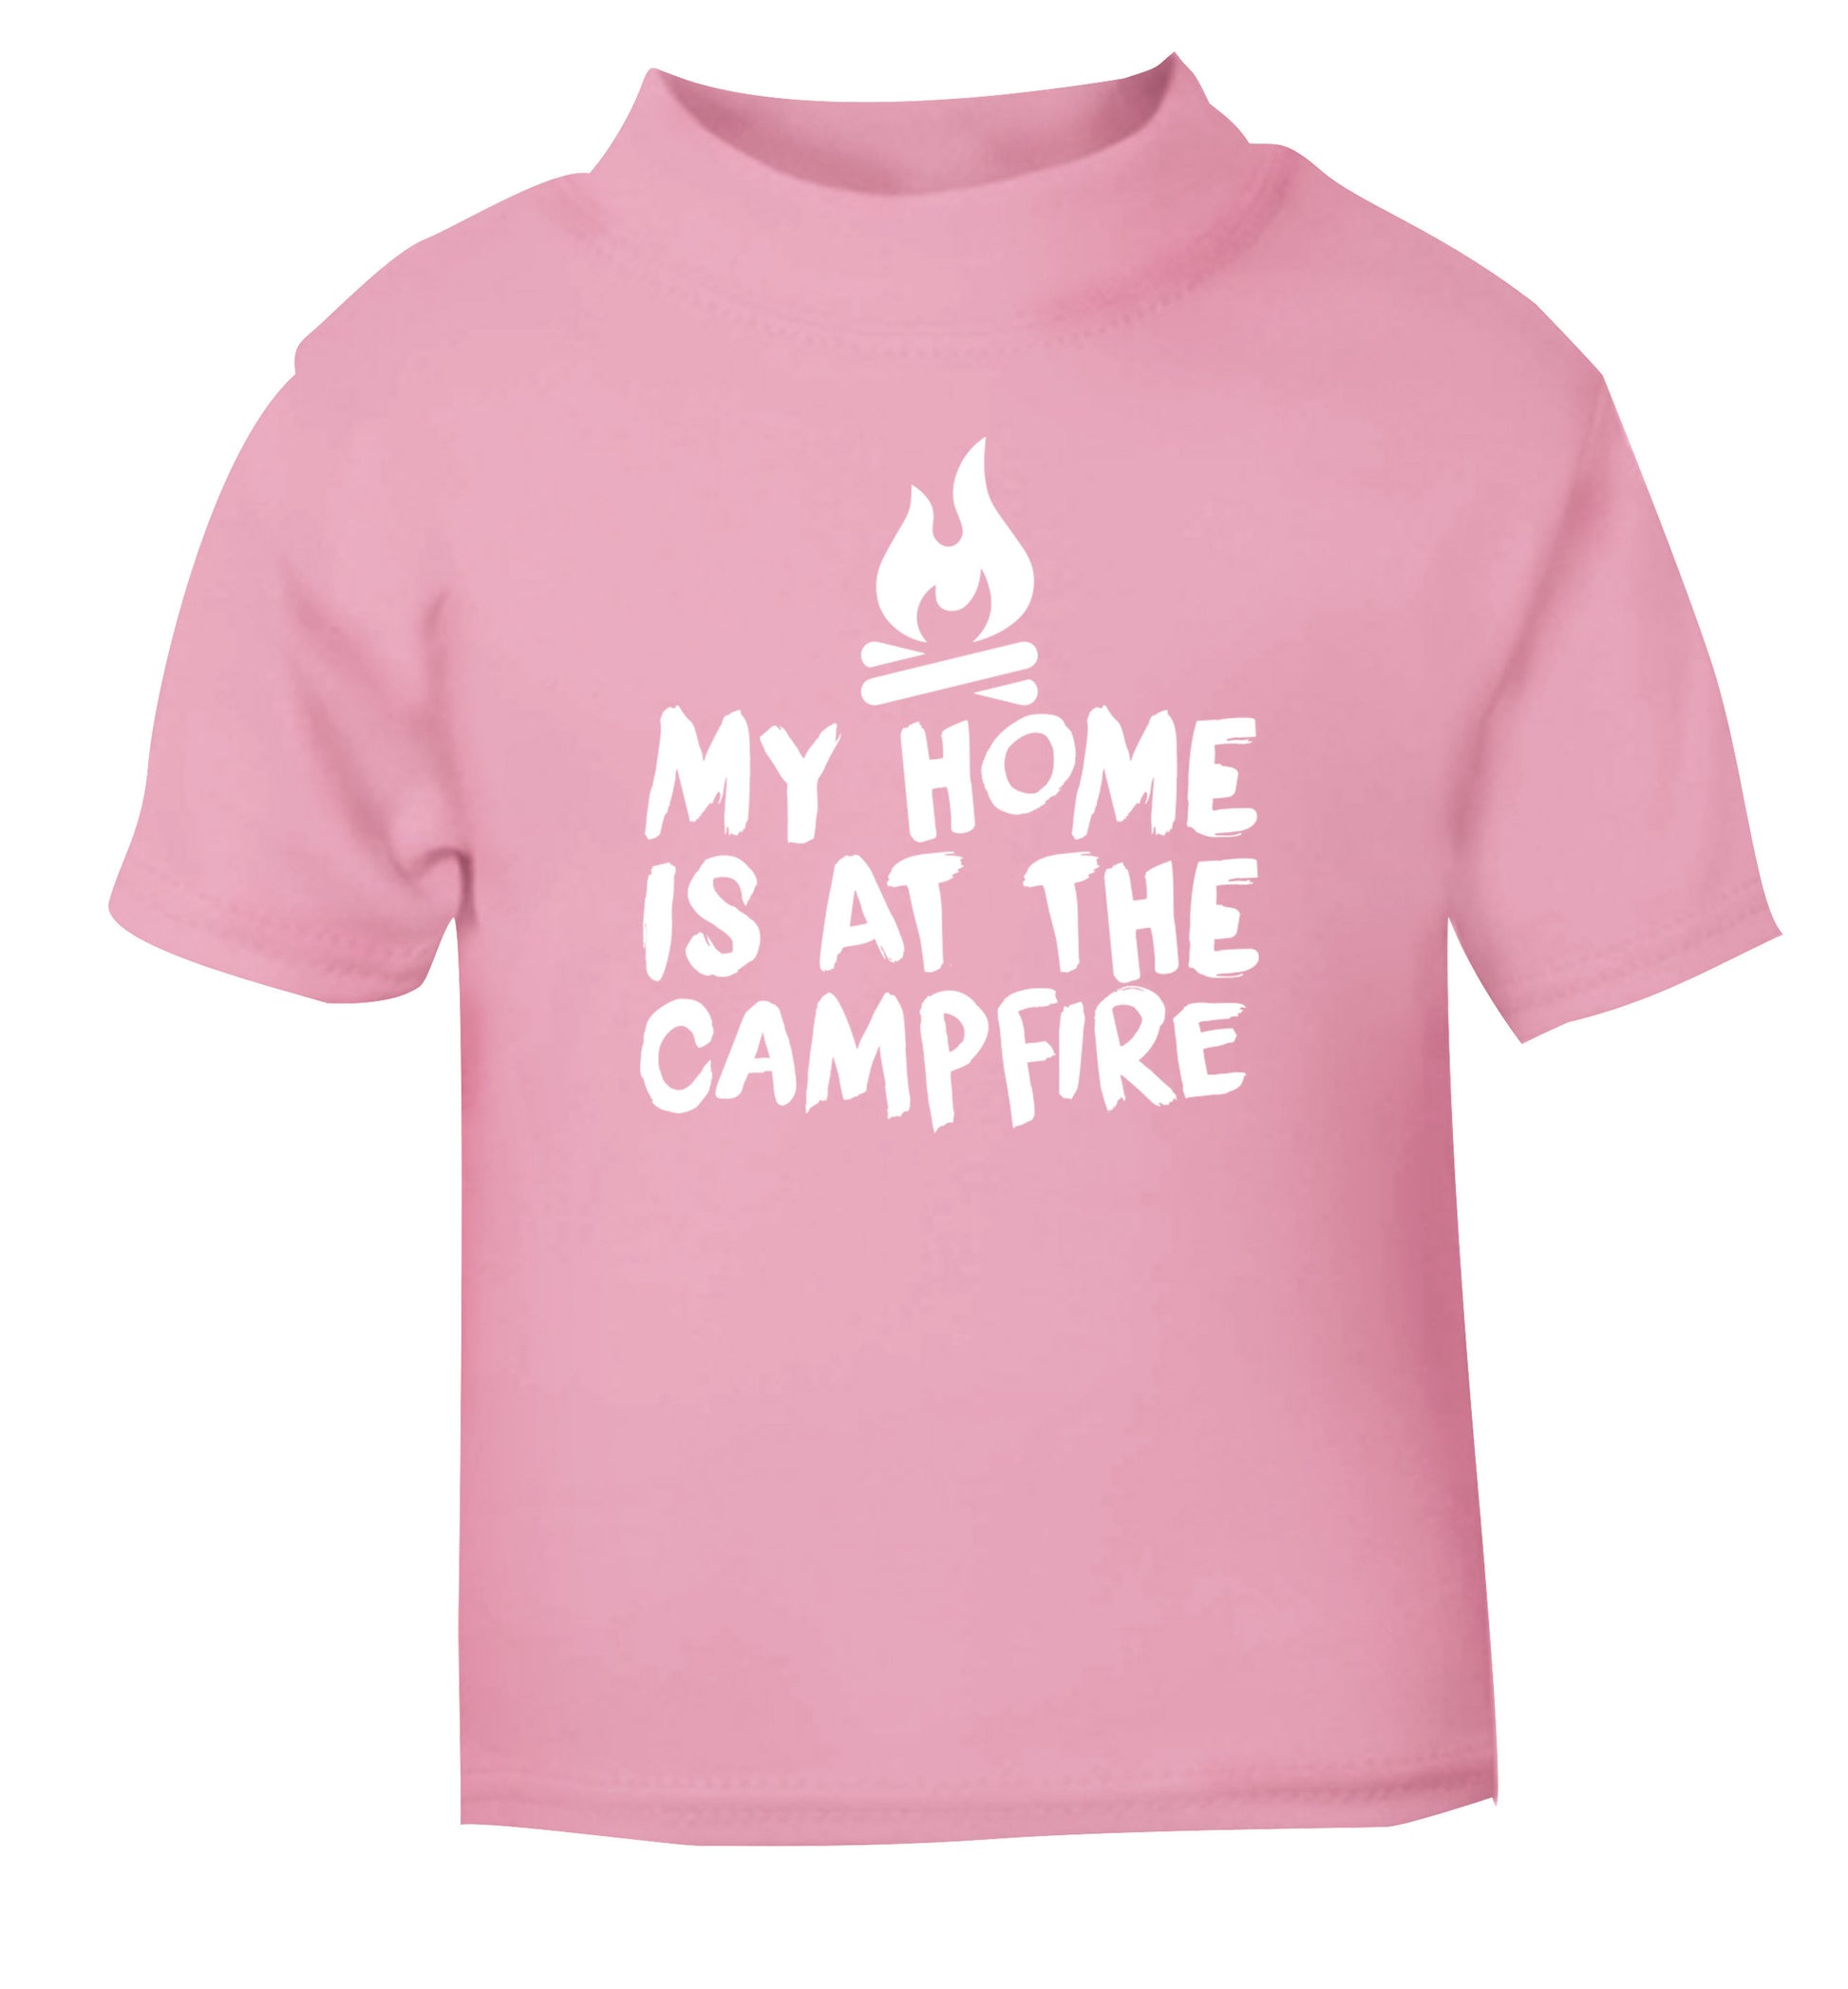 My home is at the campfire light pink Baby Toddler Tshirt 2 Years